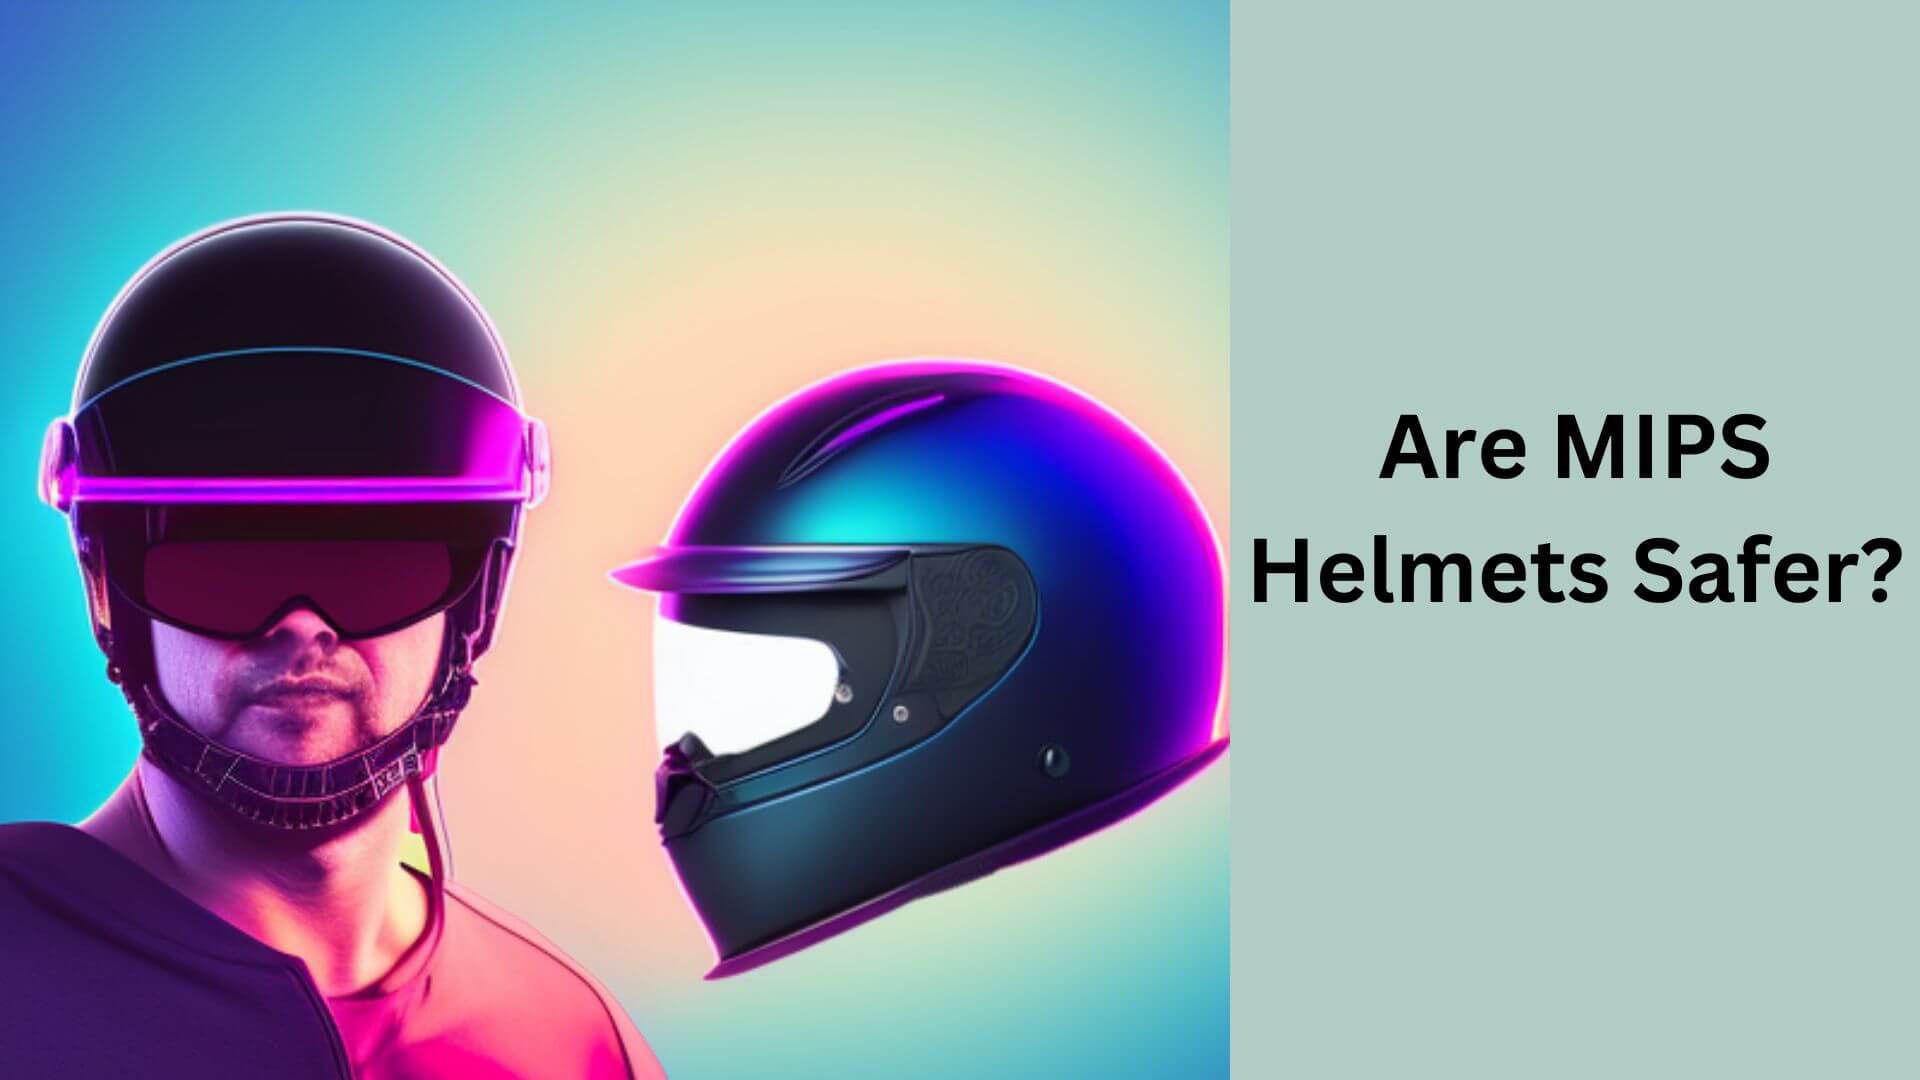 Are MIPS Helmets Safer Than Other Types of Helmets?